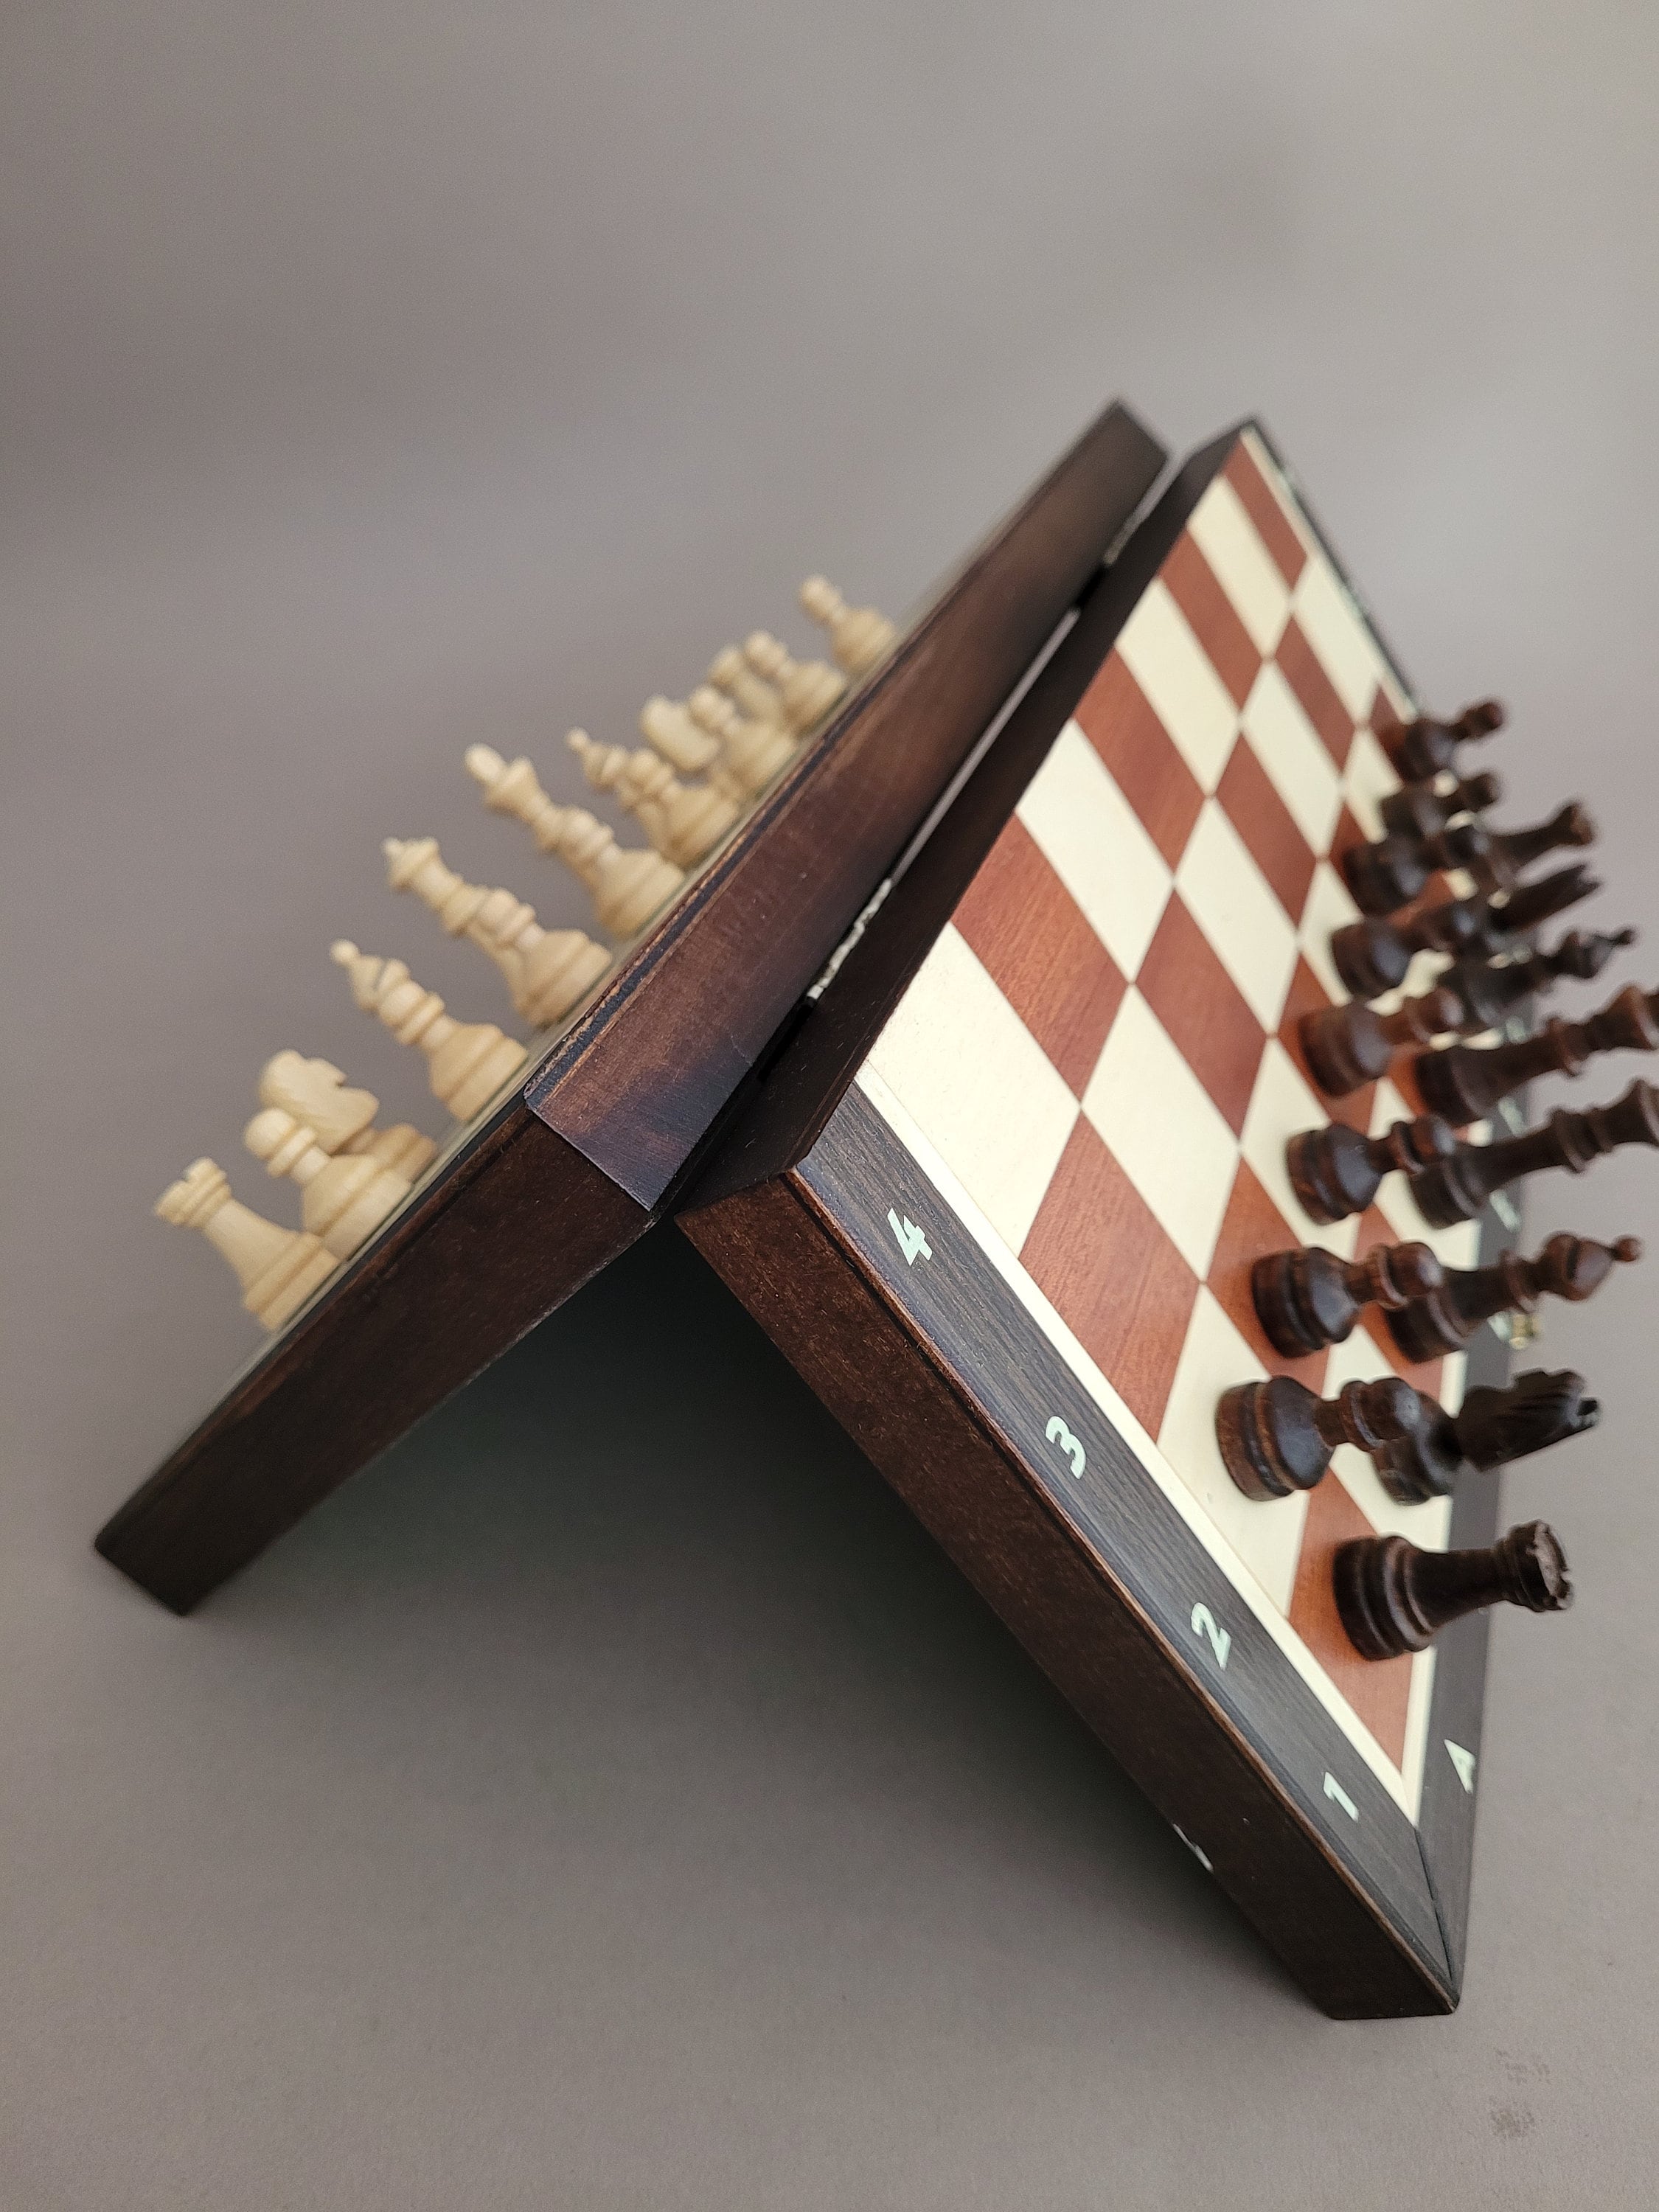 NEW Chess Wooden Set Folding Chessboard Pieces Wood Board New Magnetic Pieces 